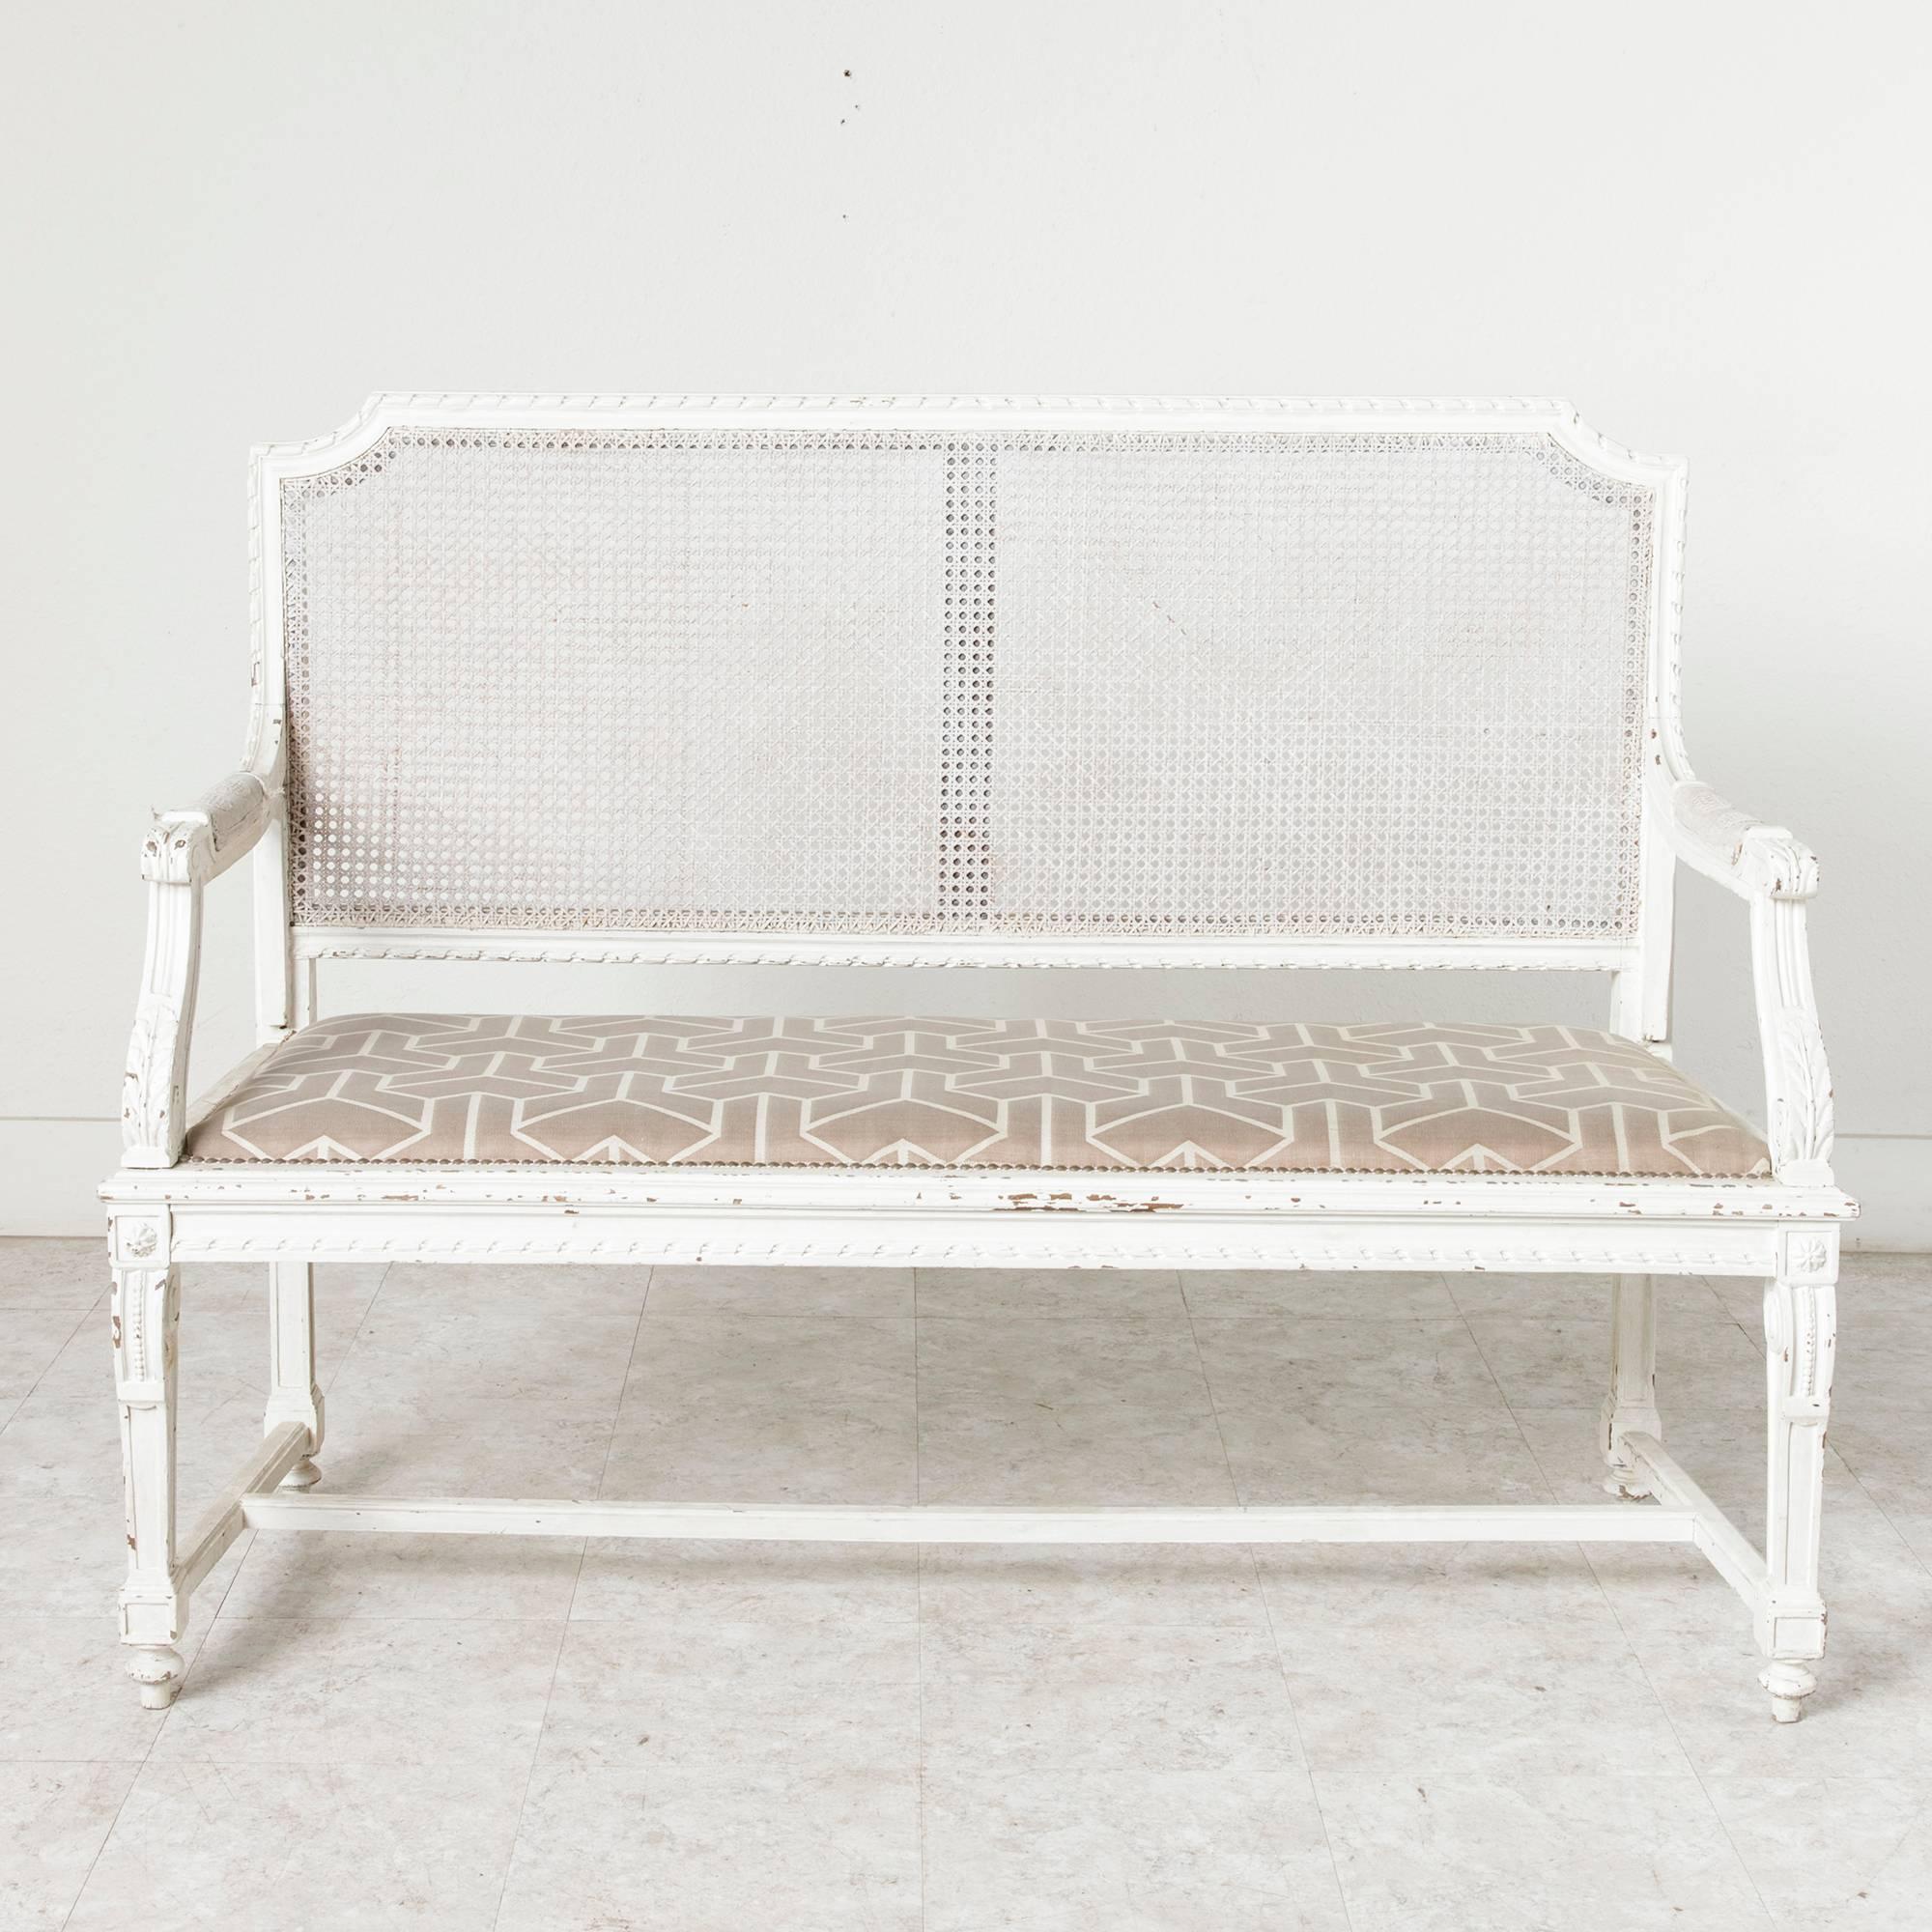 This late 19th century hand-carved Louis XVI style banquette or bench, painted in crisp white, features a caned back and upholstered seat. Perfect for an entryway, garden room, or for sitting on the veranda, circa 1880.